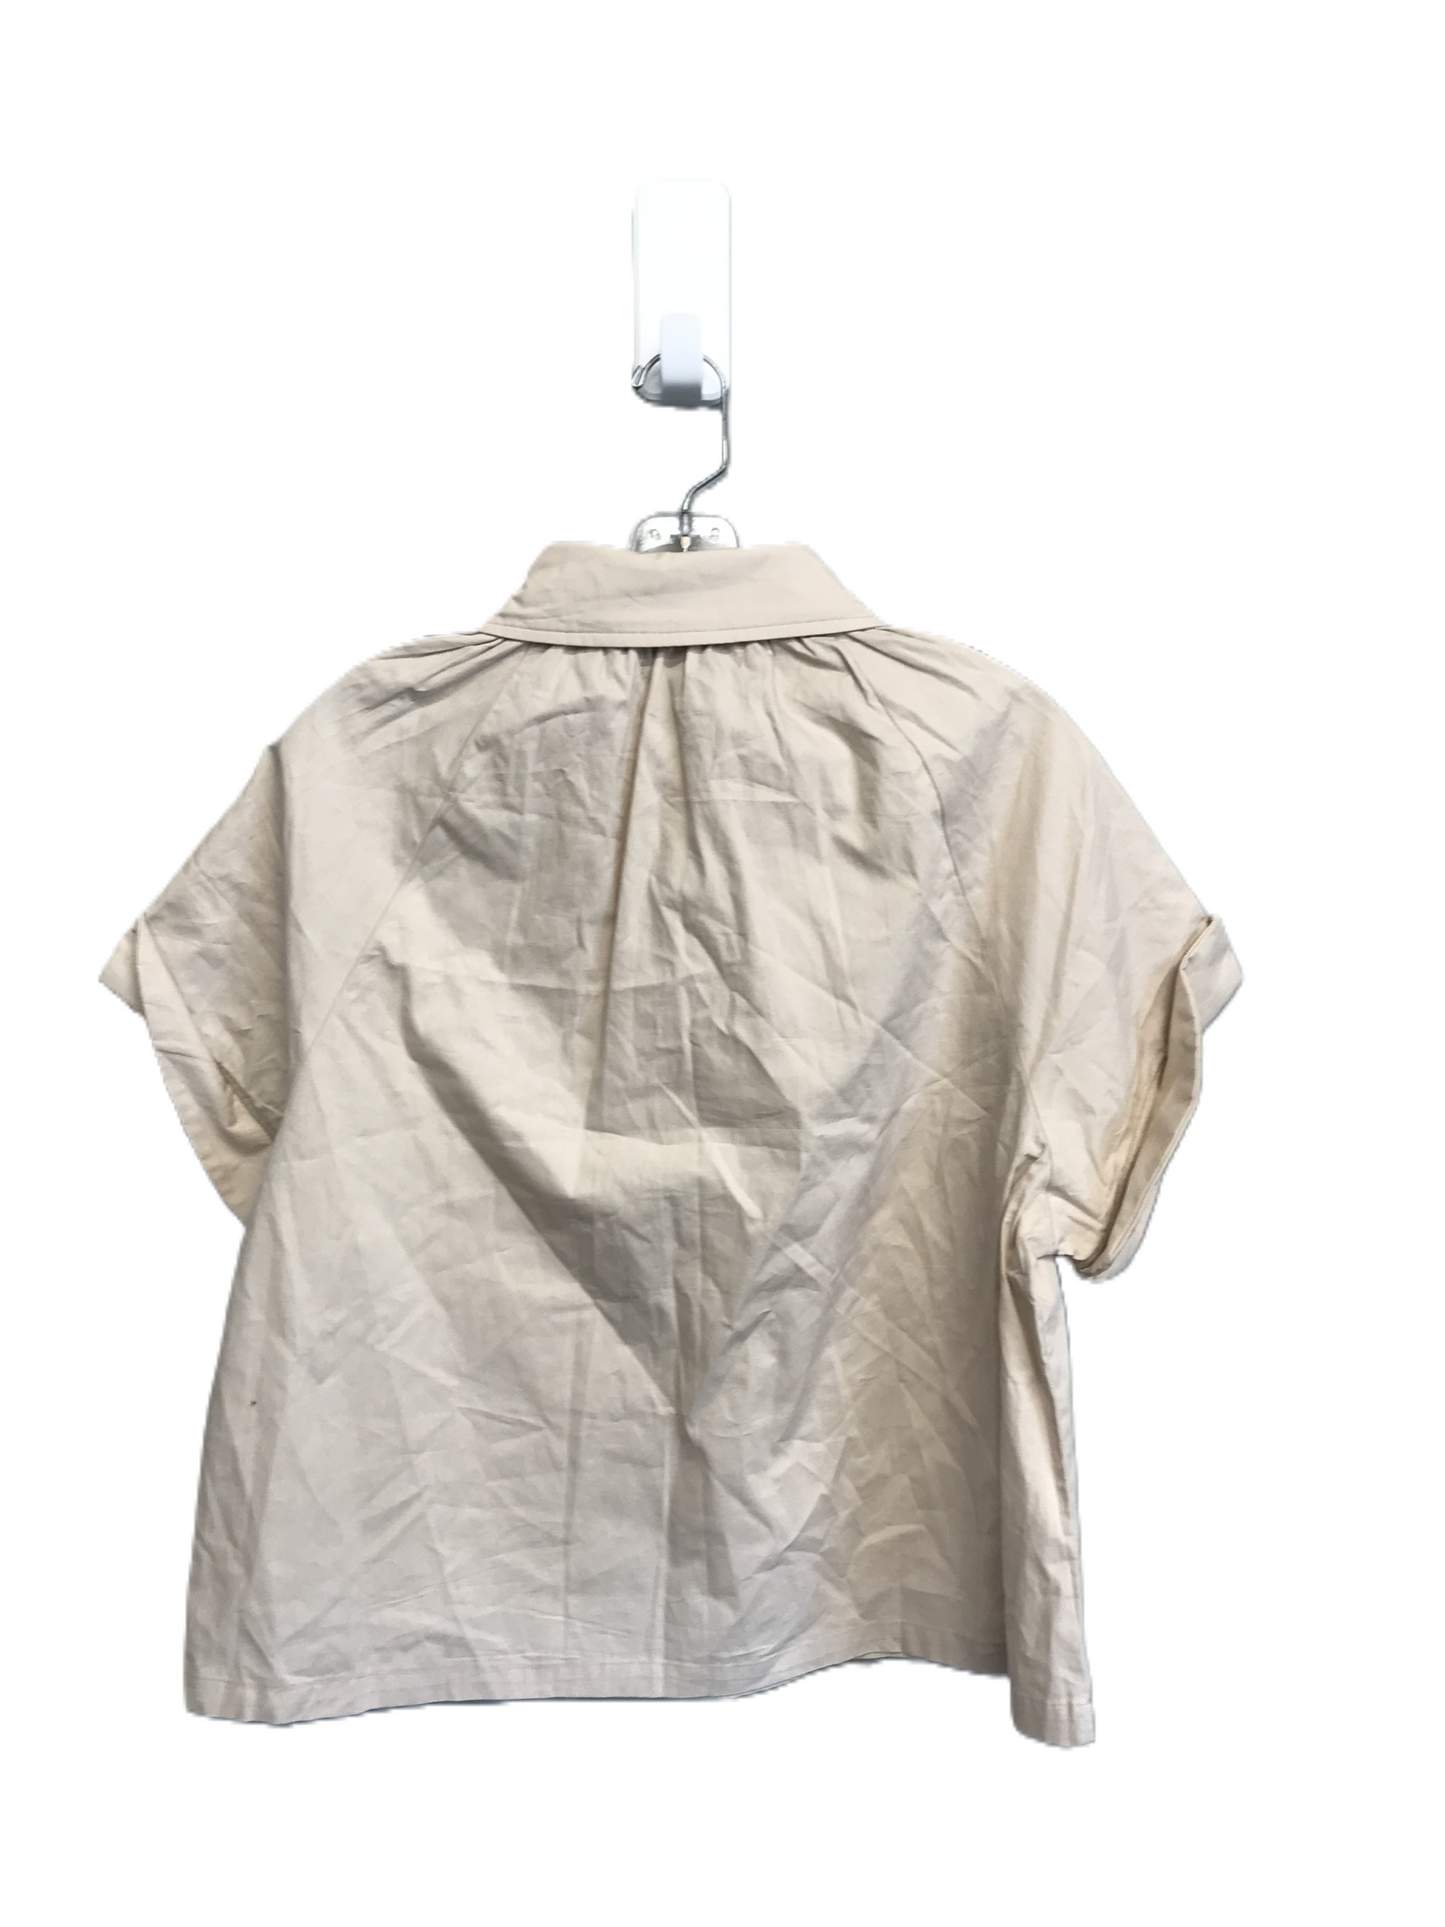 Tan Top Short Sleeve By Deluc Size: L